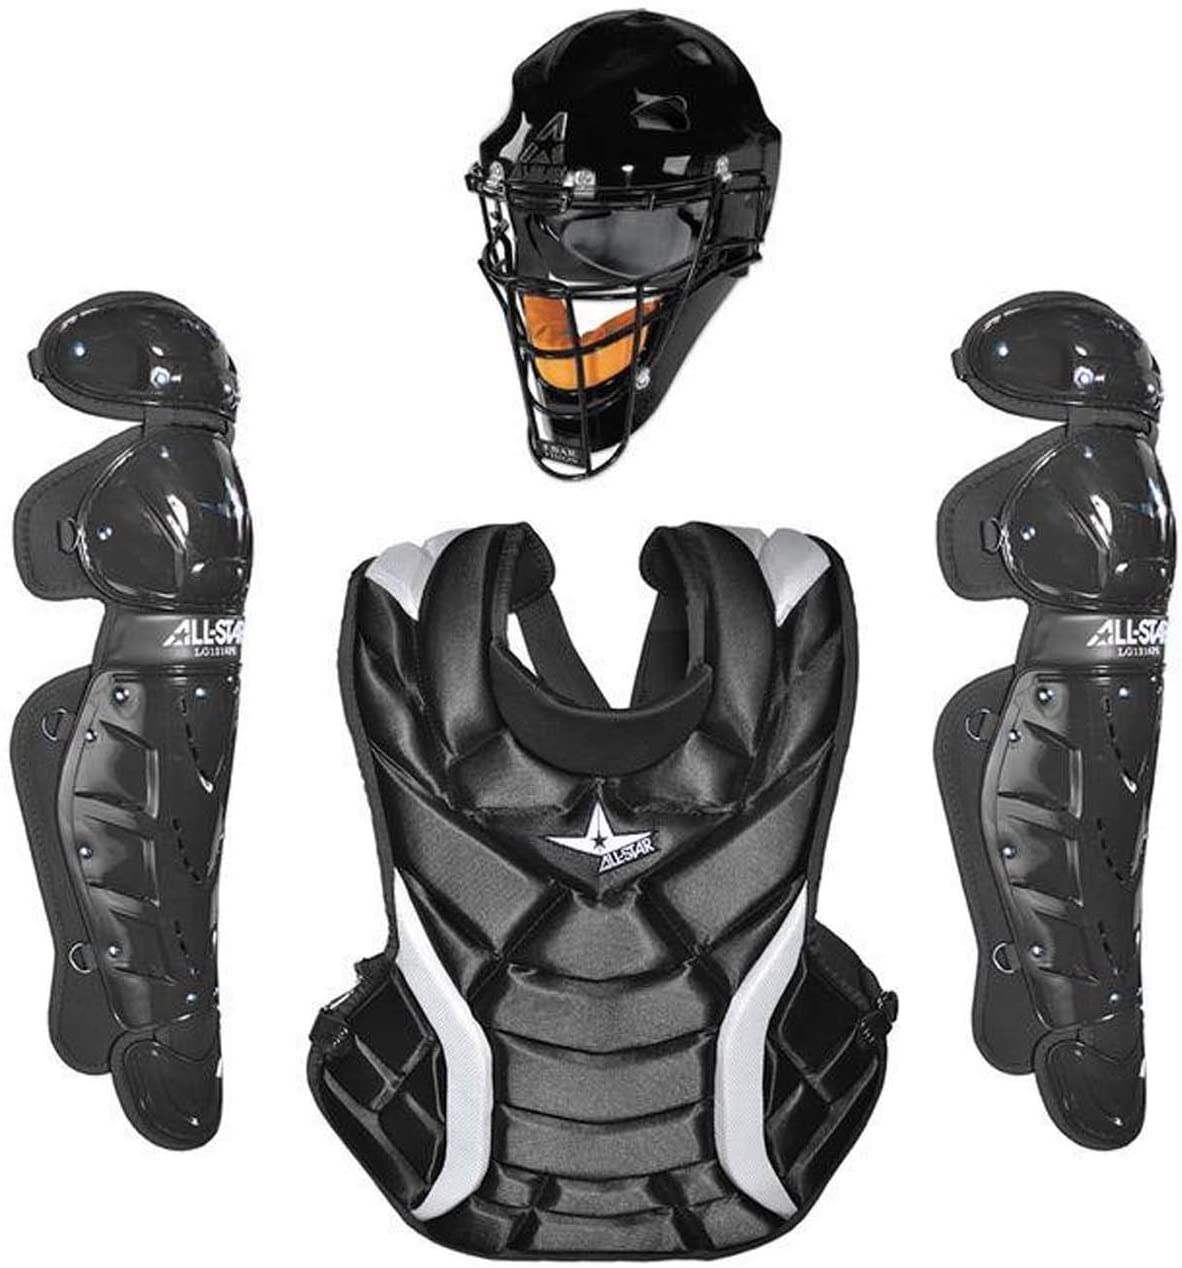 all-star-fastpitch-series-13-catchers-set-ages-9-12 CKW135PS-BK All-Star  The Fastpitch Series Catchers Set includes a catchers mask chest protector